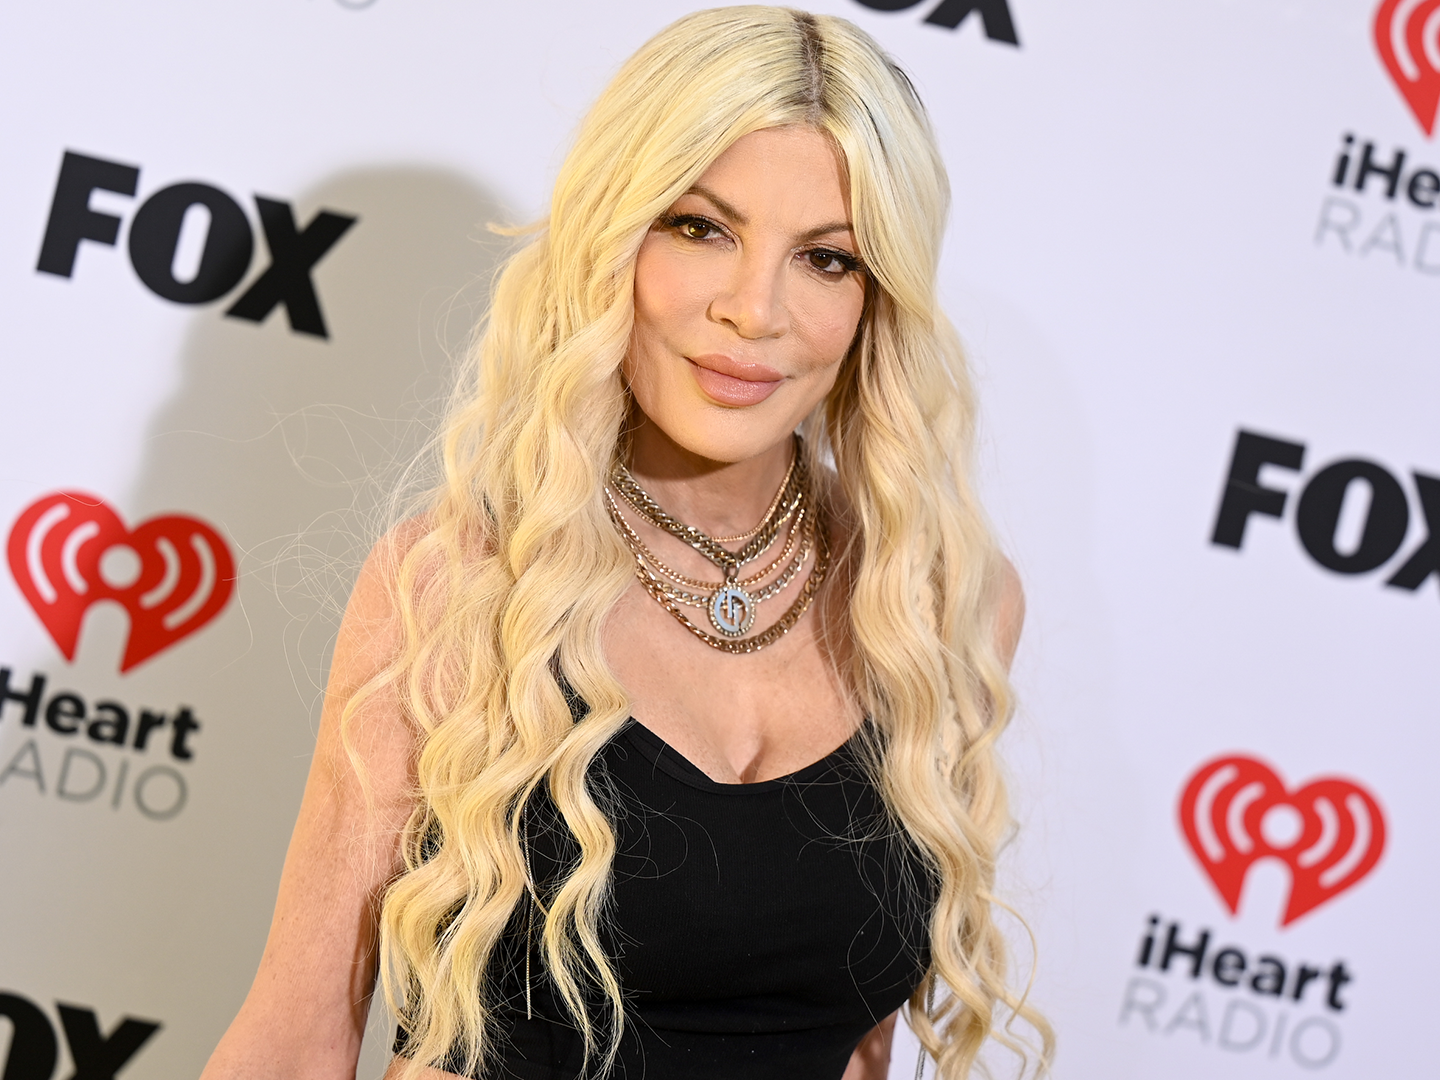 Tori Spelling Just Got Surprisingly Candid About 'Making Out' With This 'Beverly Hills, 90210' Alum